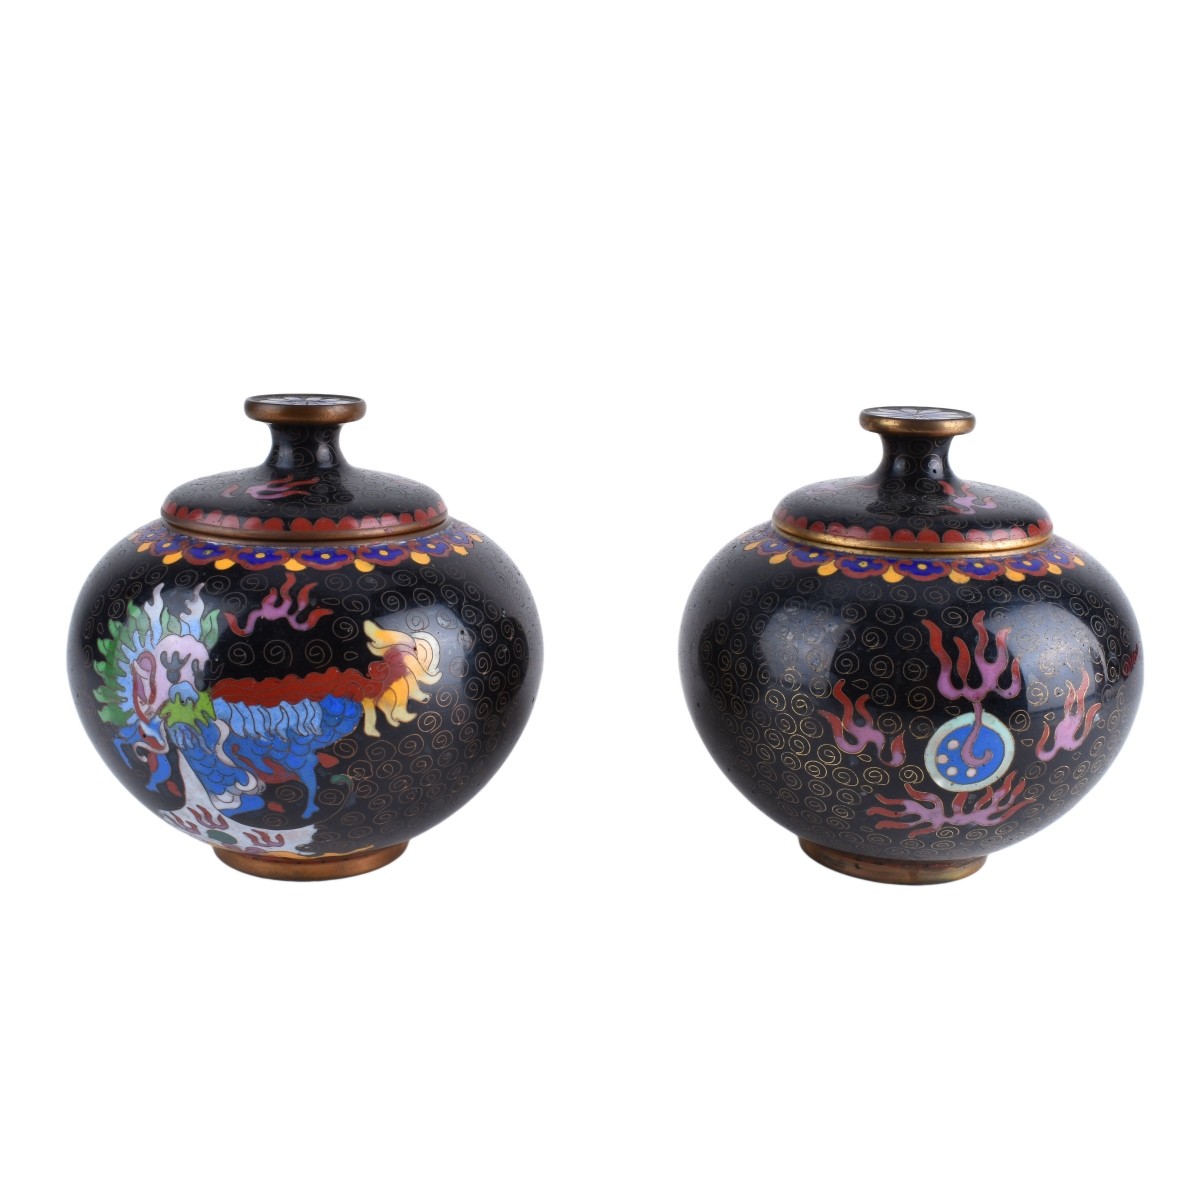 Pair of Chinese Cloisonne Enamel Covered Jars